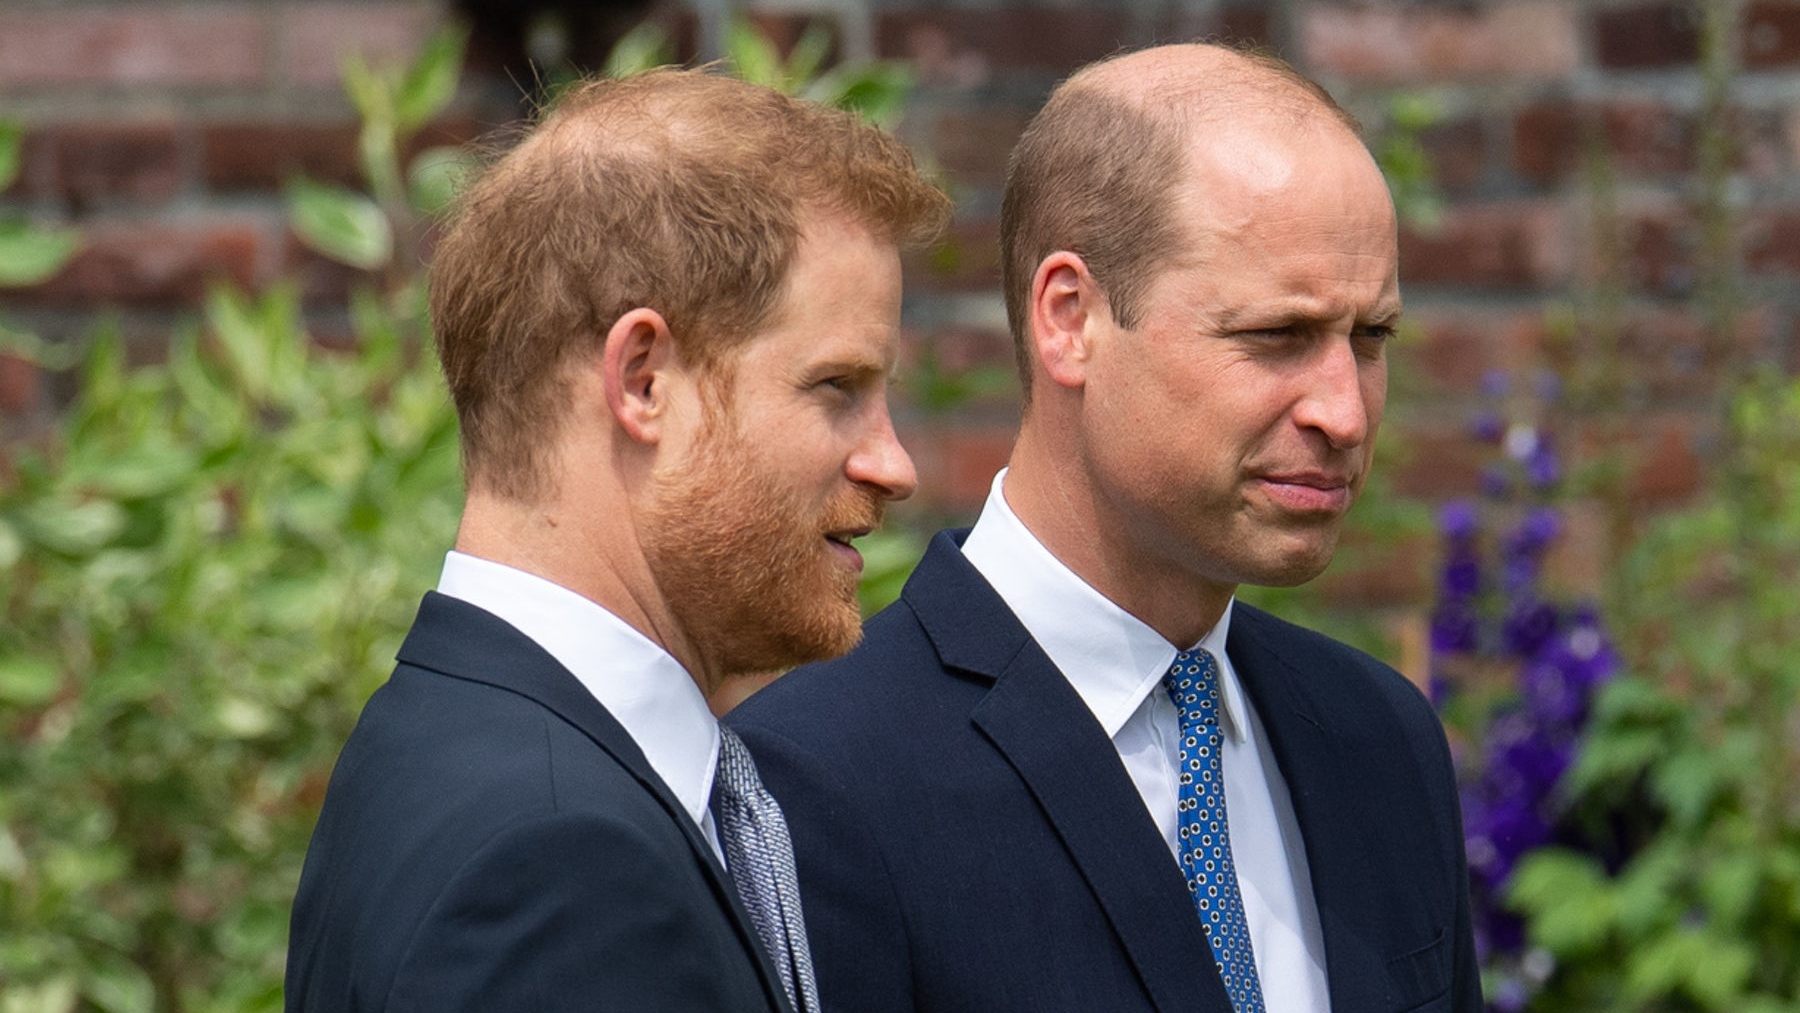 Prince Harry and Prince William during the unveiling of a statue of Princess Diana